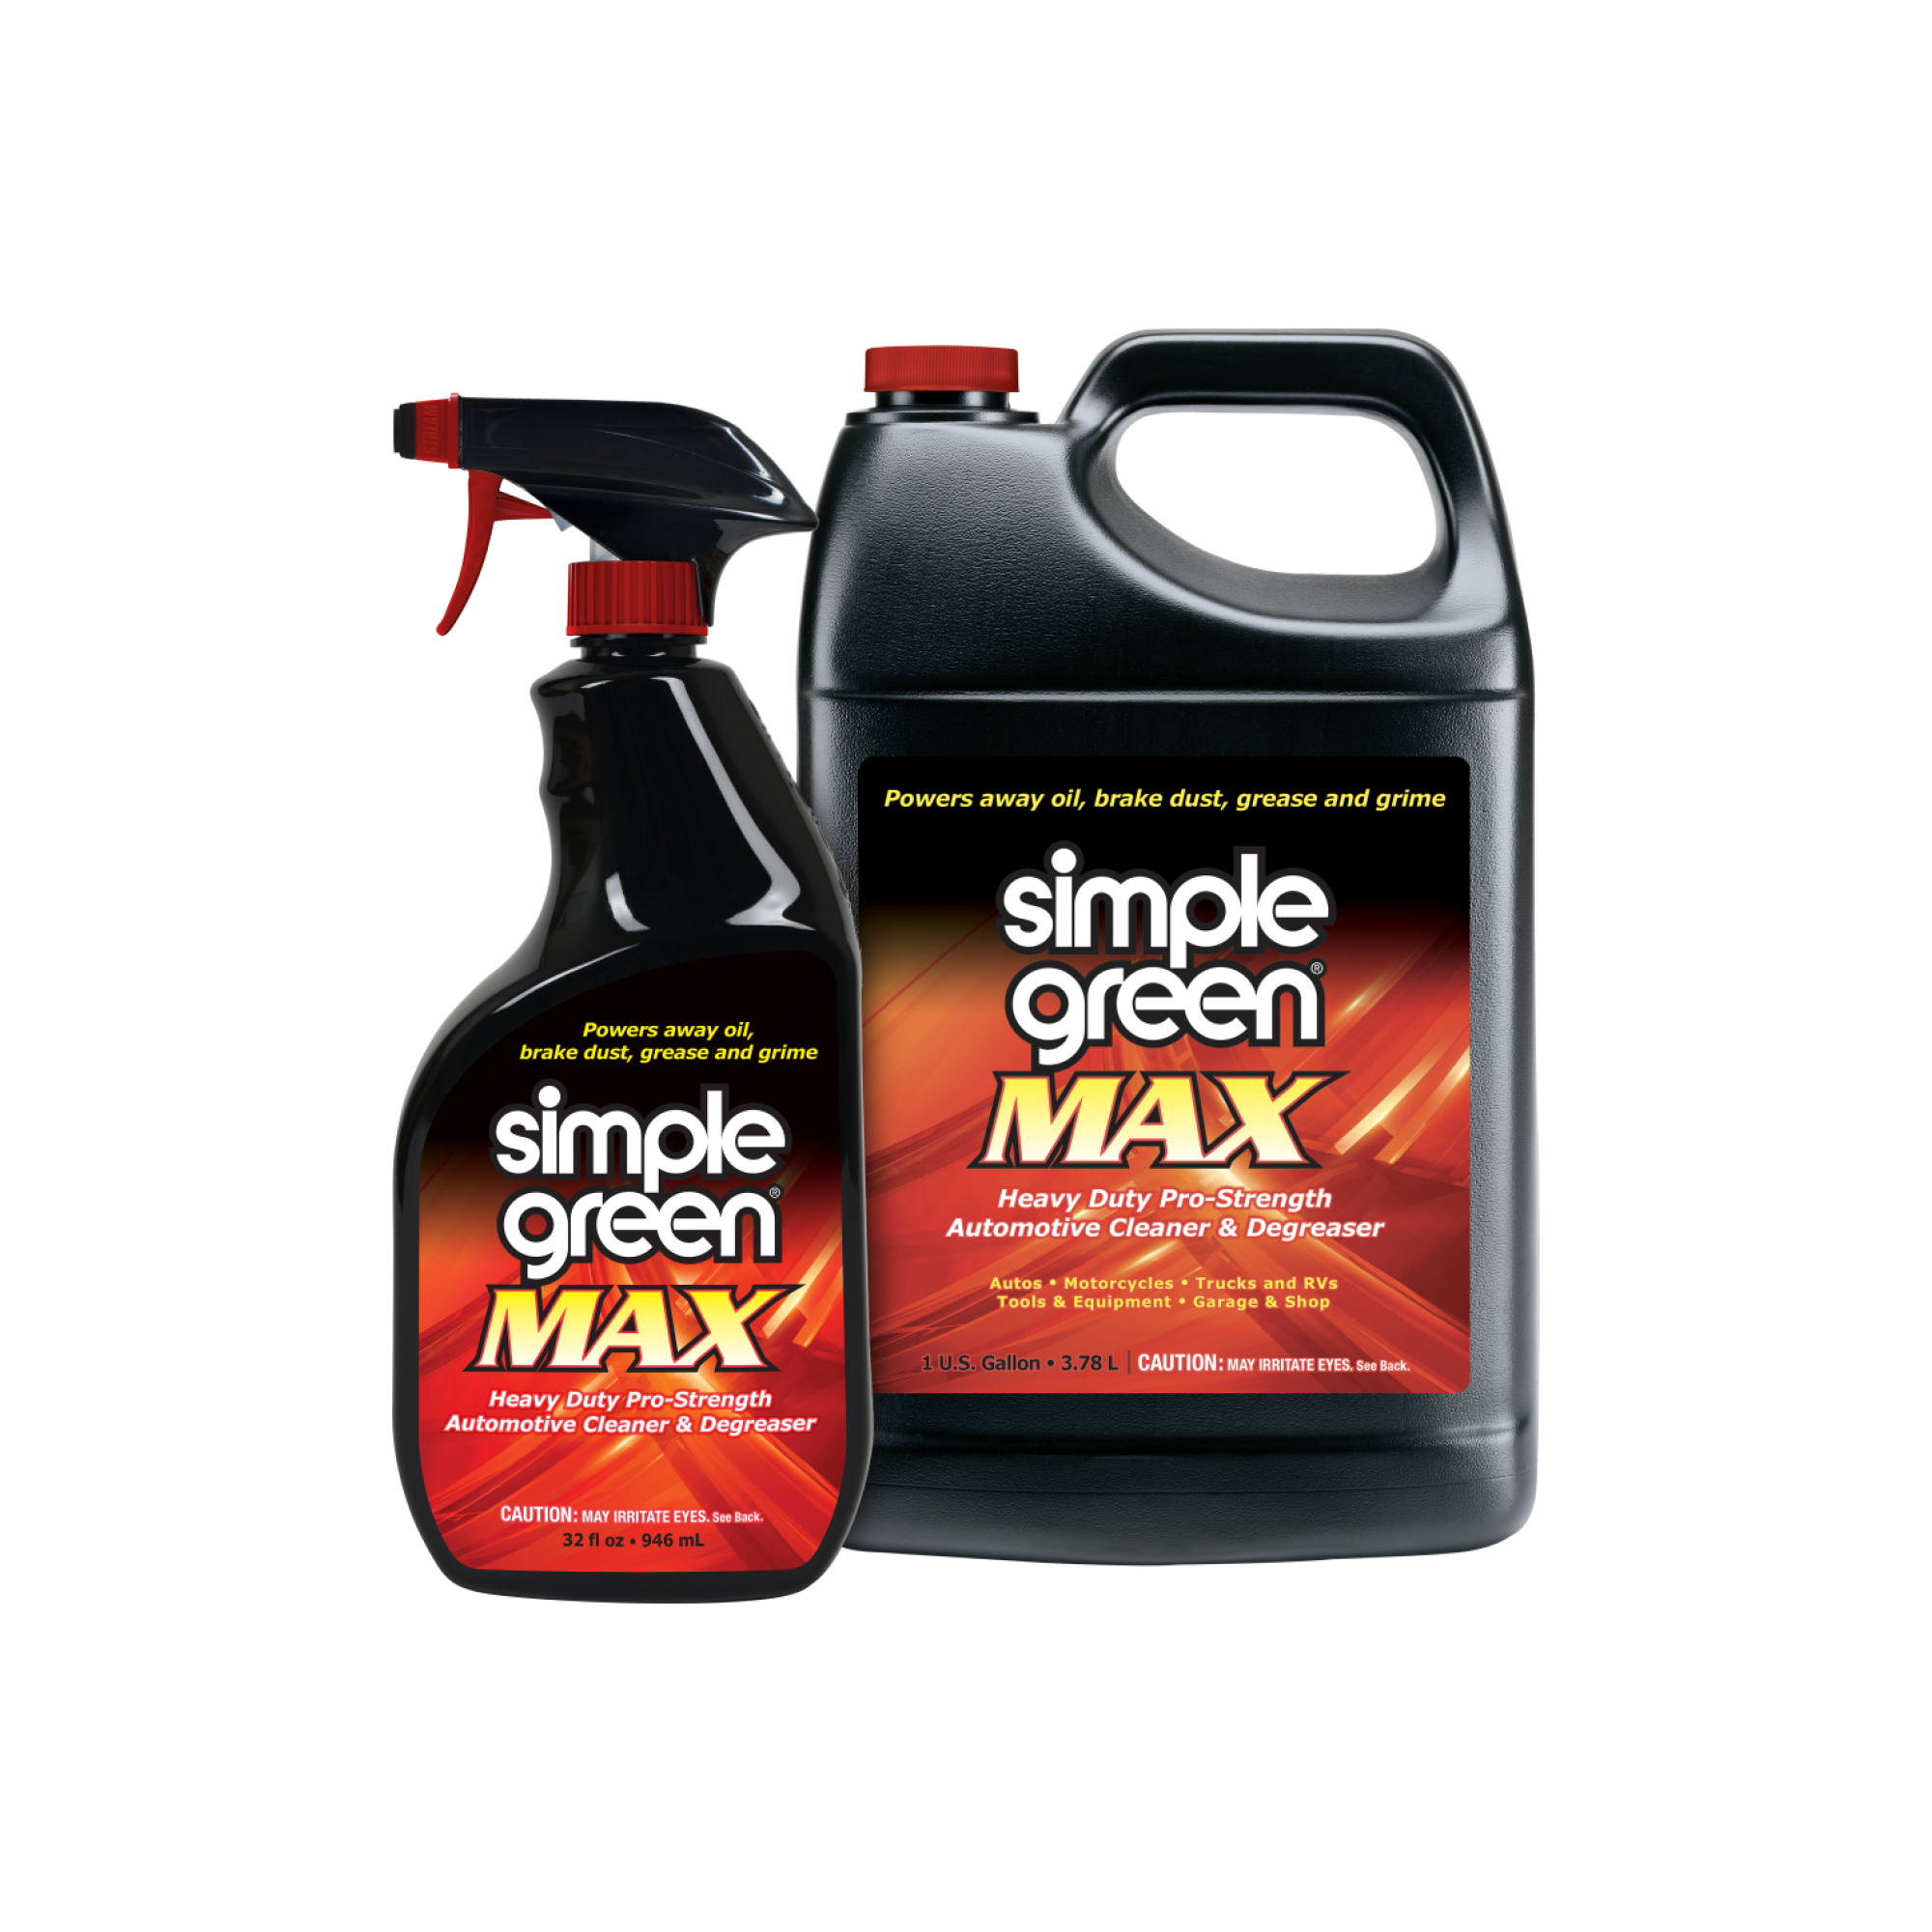 Simple Green® Max Automotive